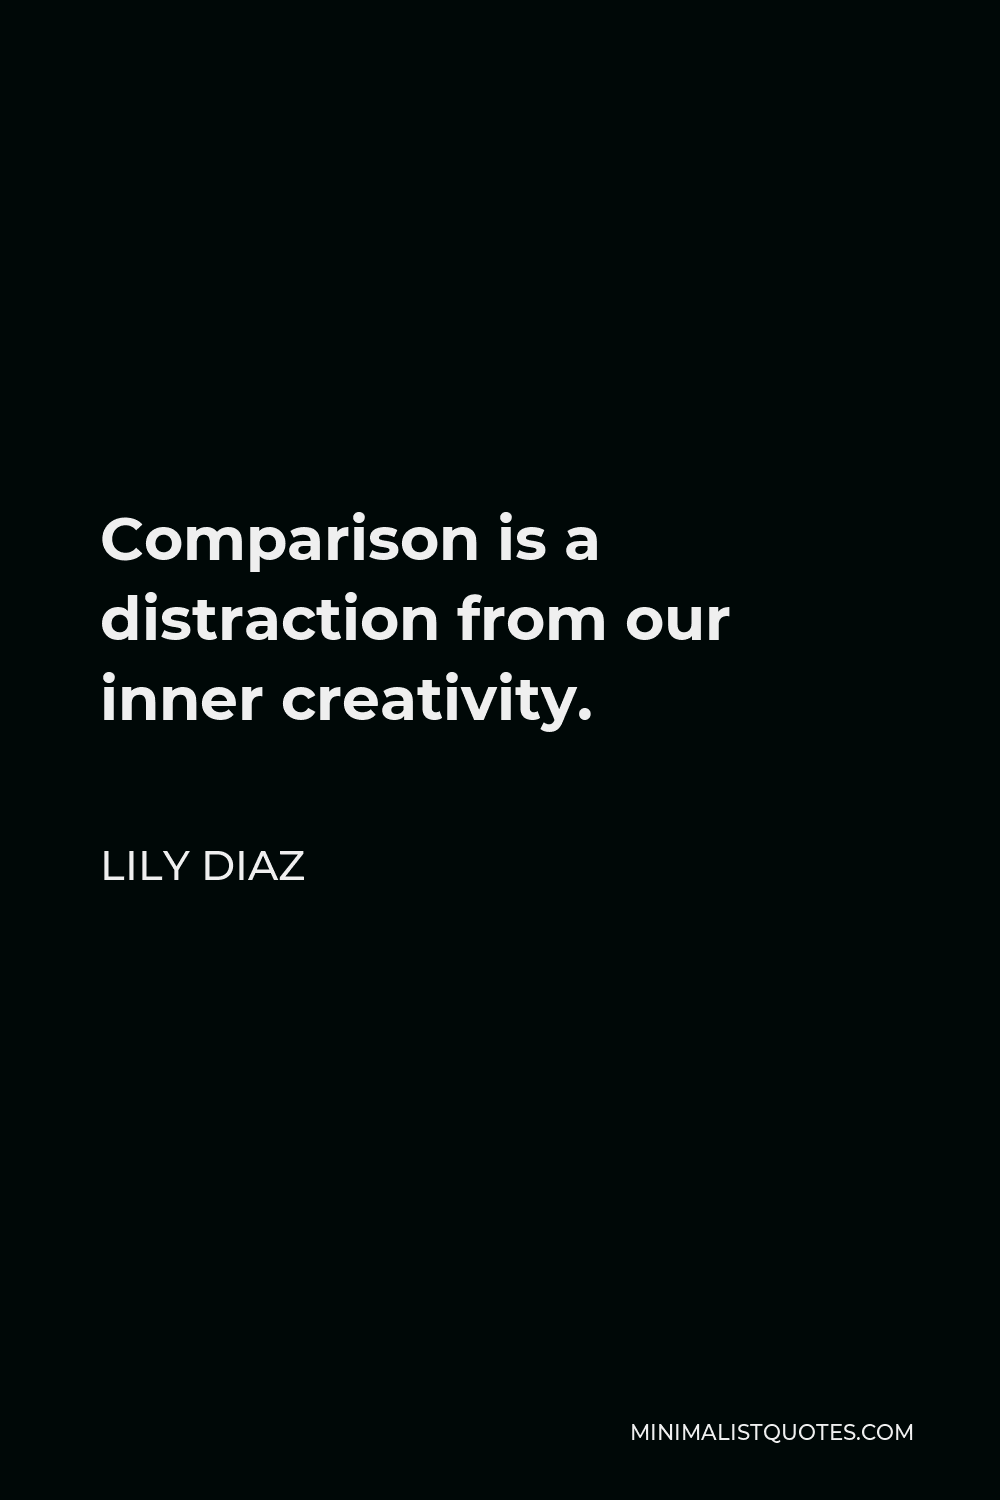 Lily Diaz Quote - Comparison is a distraction from our inner creativity.